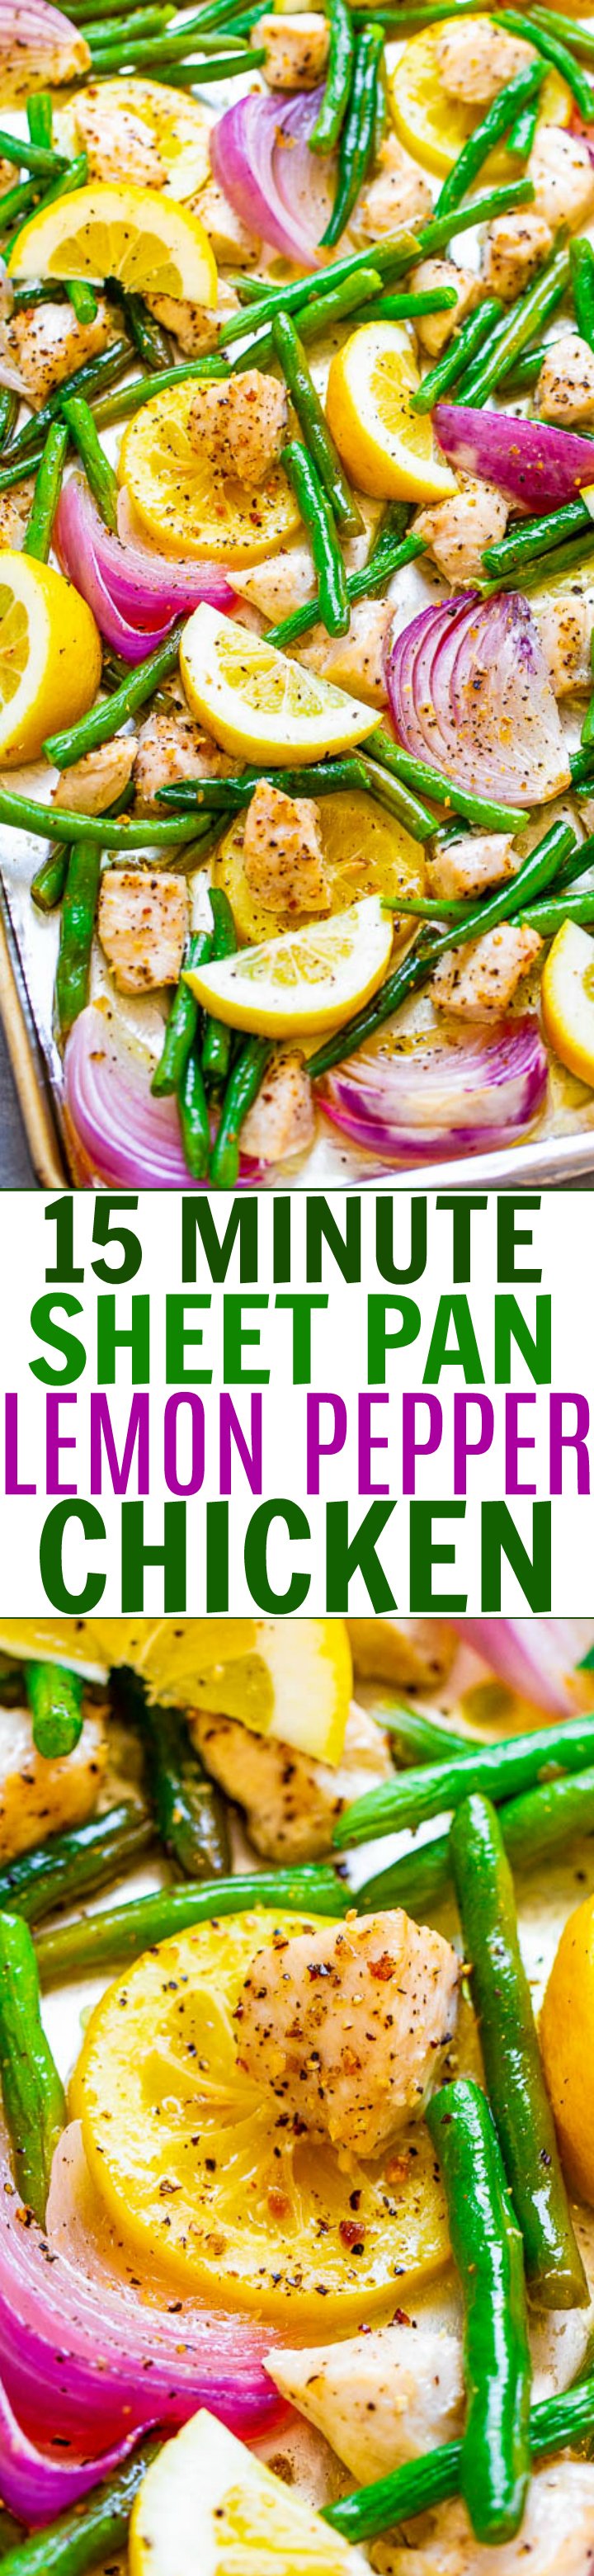 15-Minute Sheet Pan Lemon Pepper Chicken - Fast, EASY, HEALTHY, and loaded with great lemon pepper flavor!! A DELISH one-pan meal with zero cleanup that's perfect for busy weeknights!!